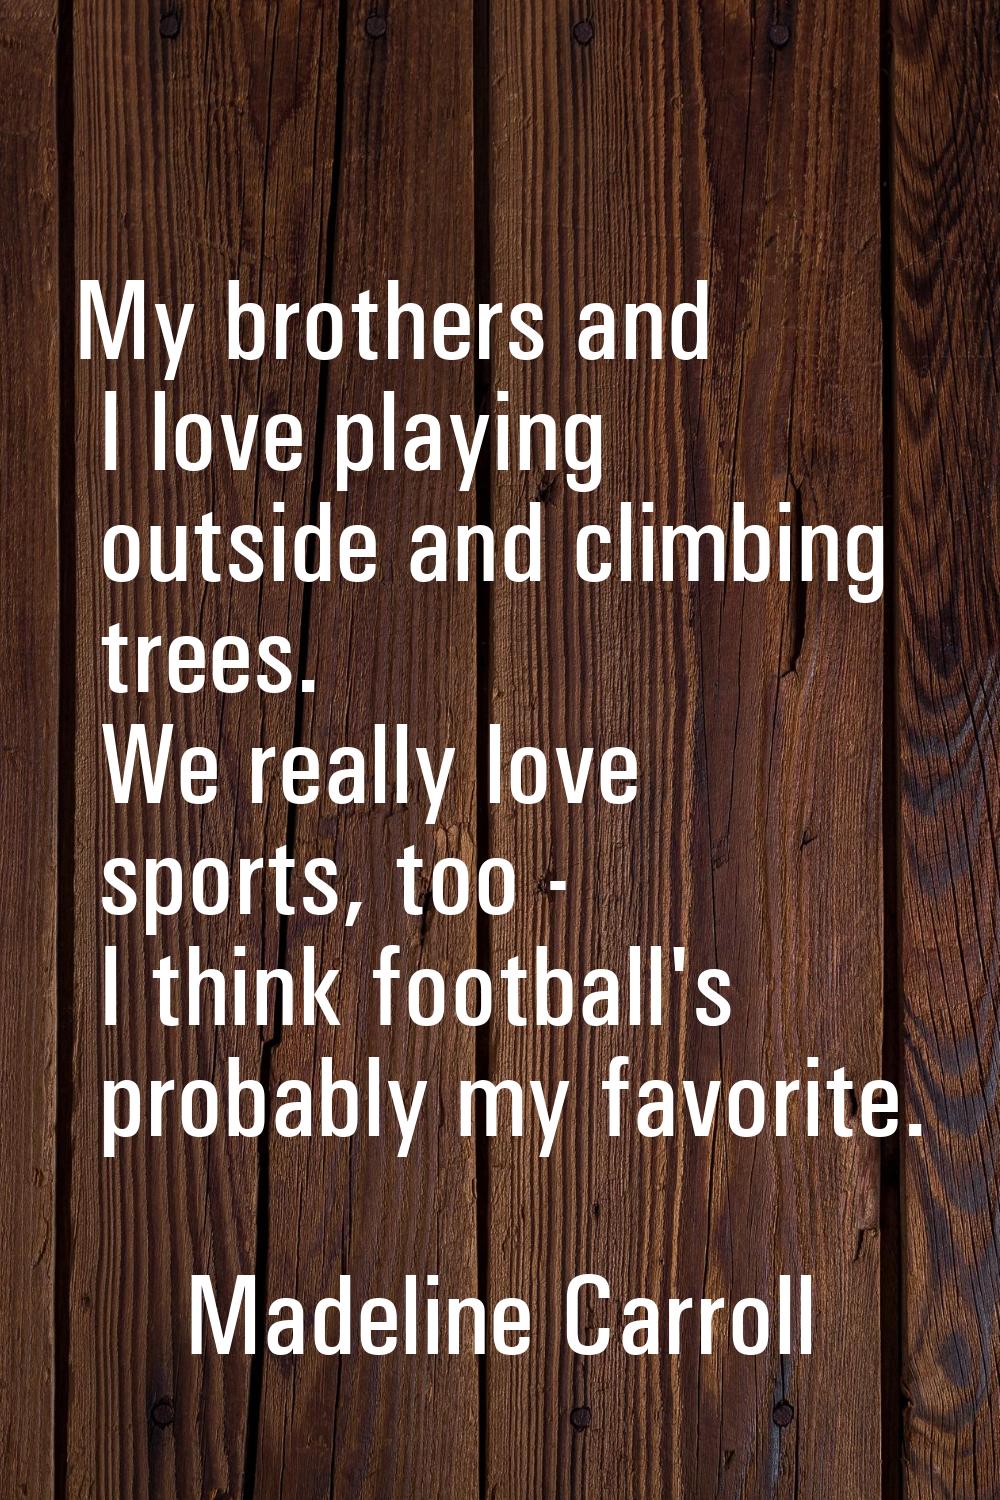 My brothers and I love playing outside and climbing trees. We really love sports, too - I think foo